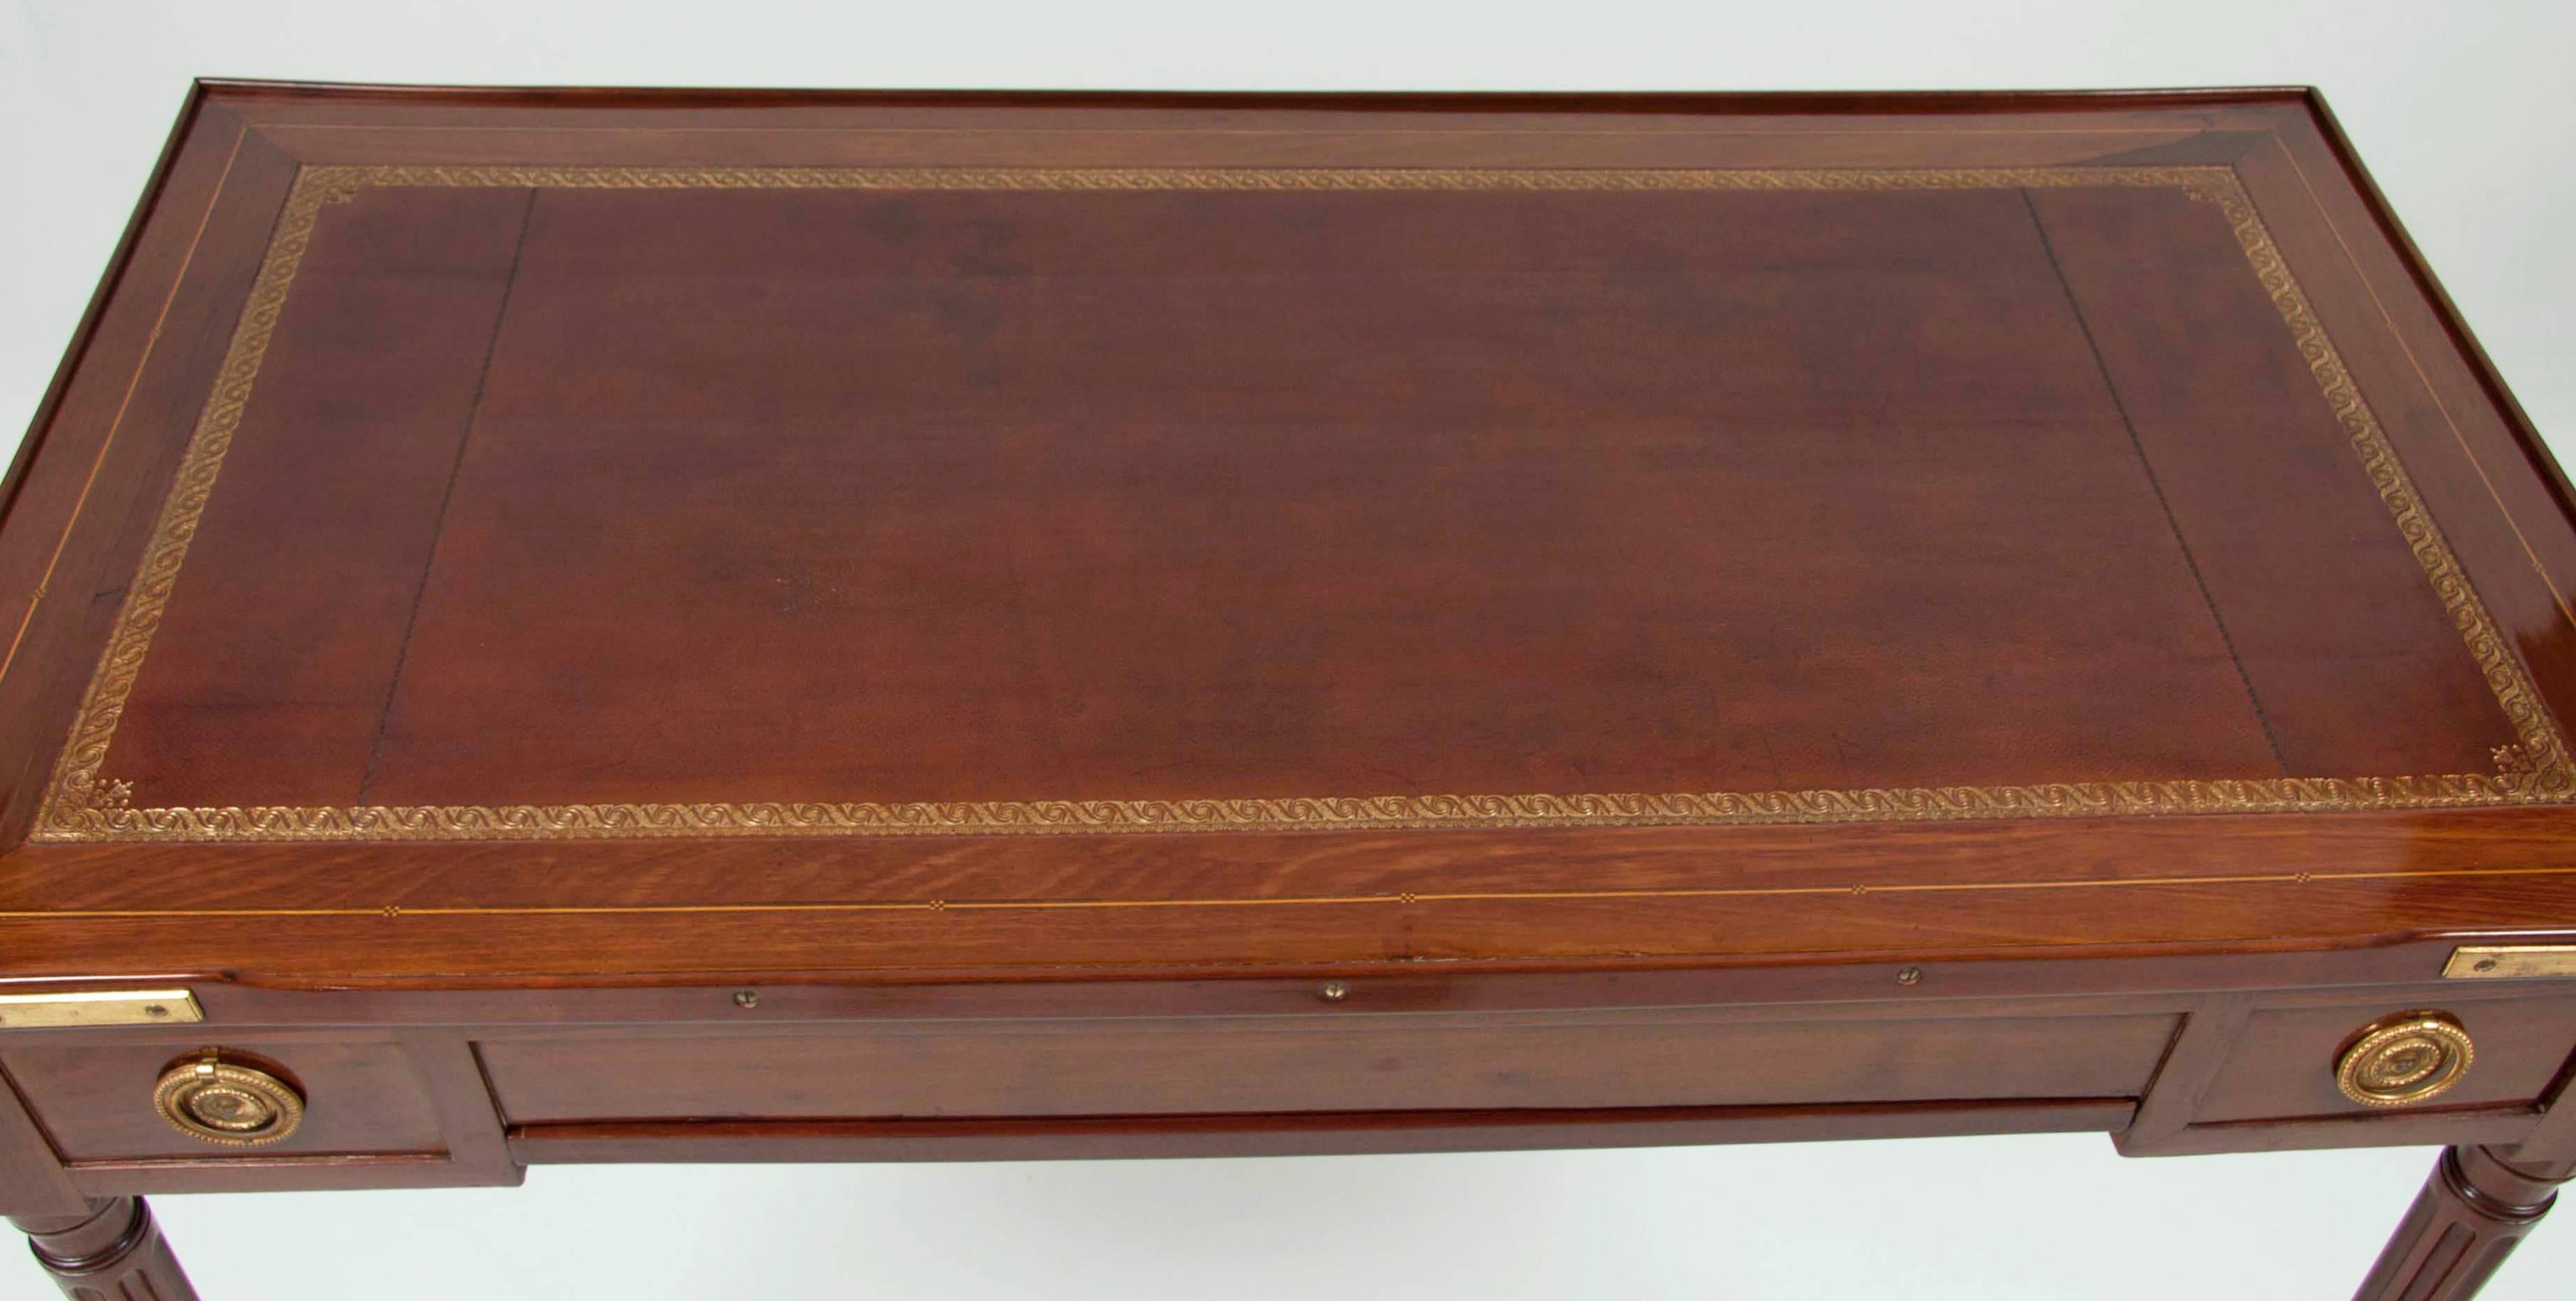 Fine Louis XVI Mahogany and Inlaid Tric Trac Table In Good Condition For Sale In Essex, MA